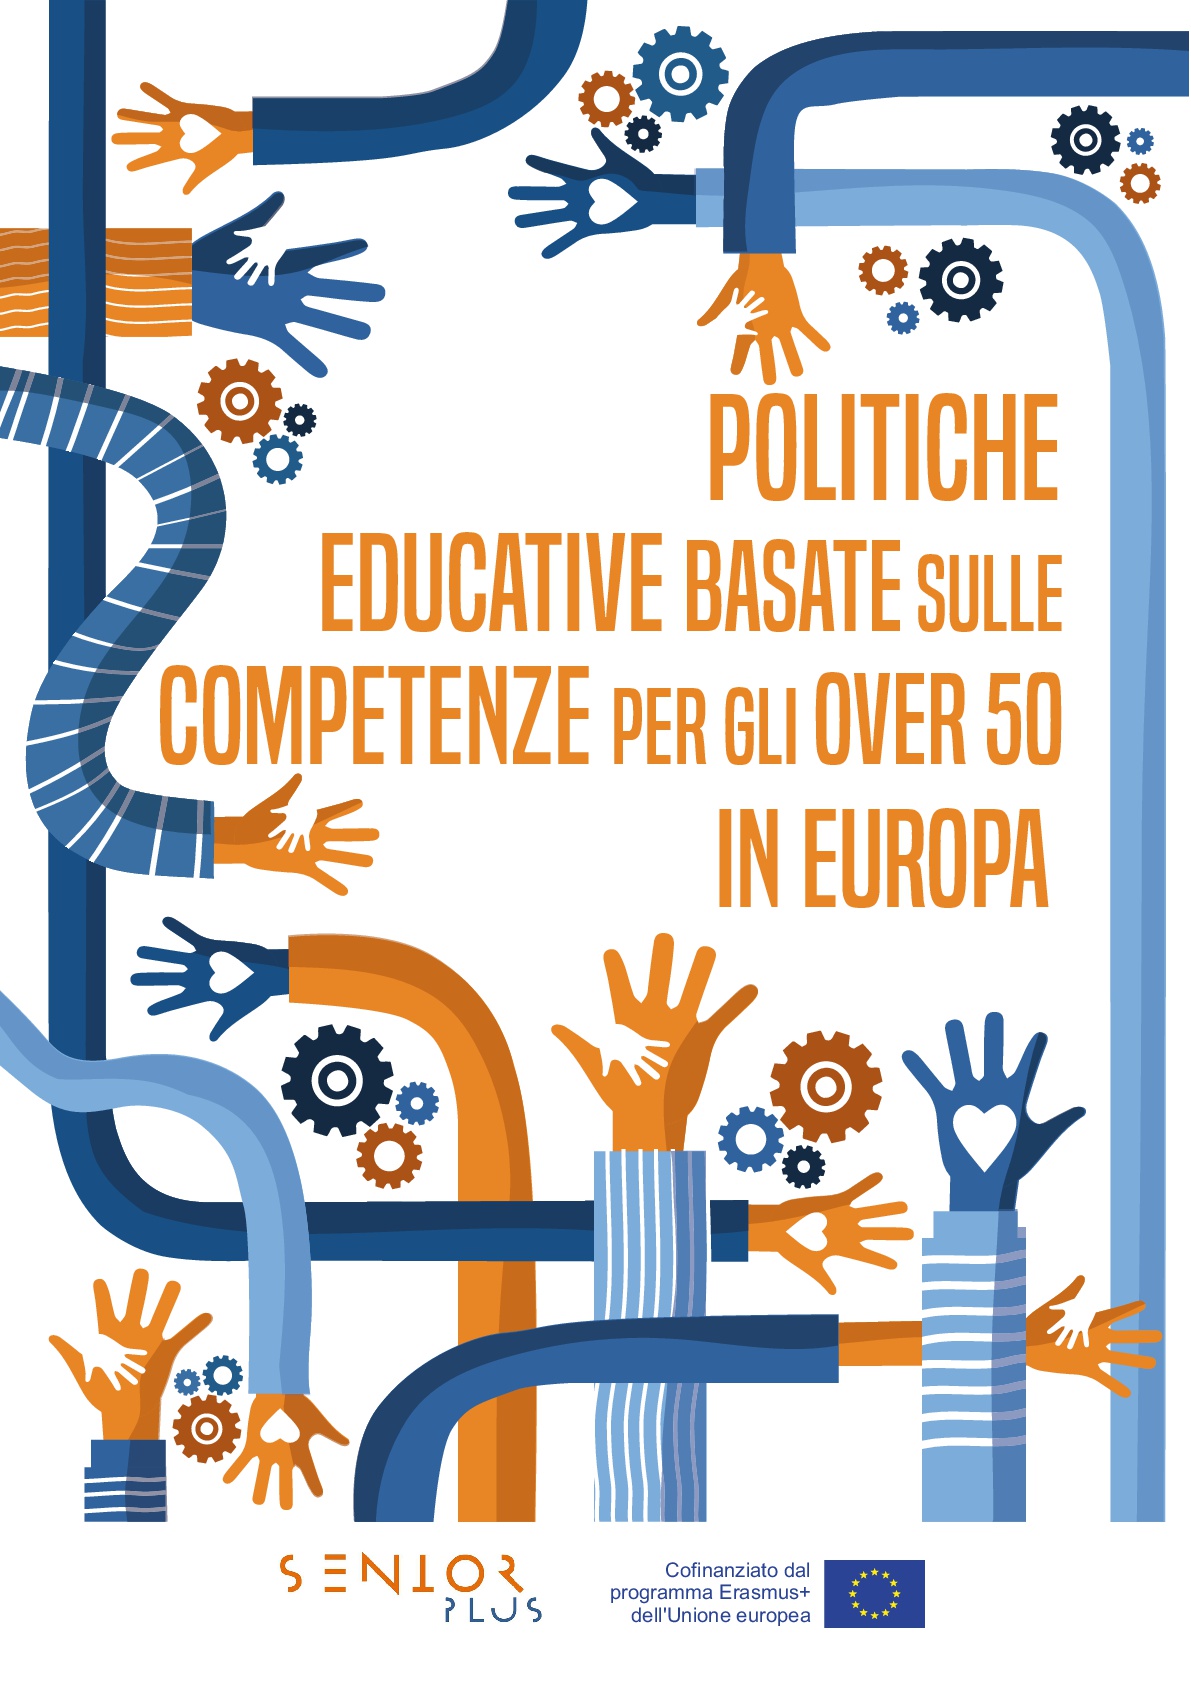 (IT) Education Policies and Competence based learning for over 50s in Europe